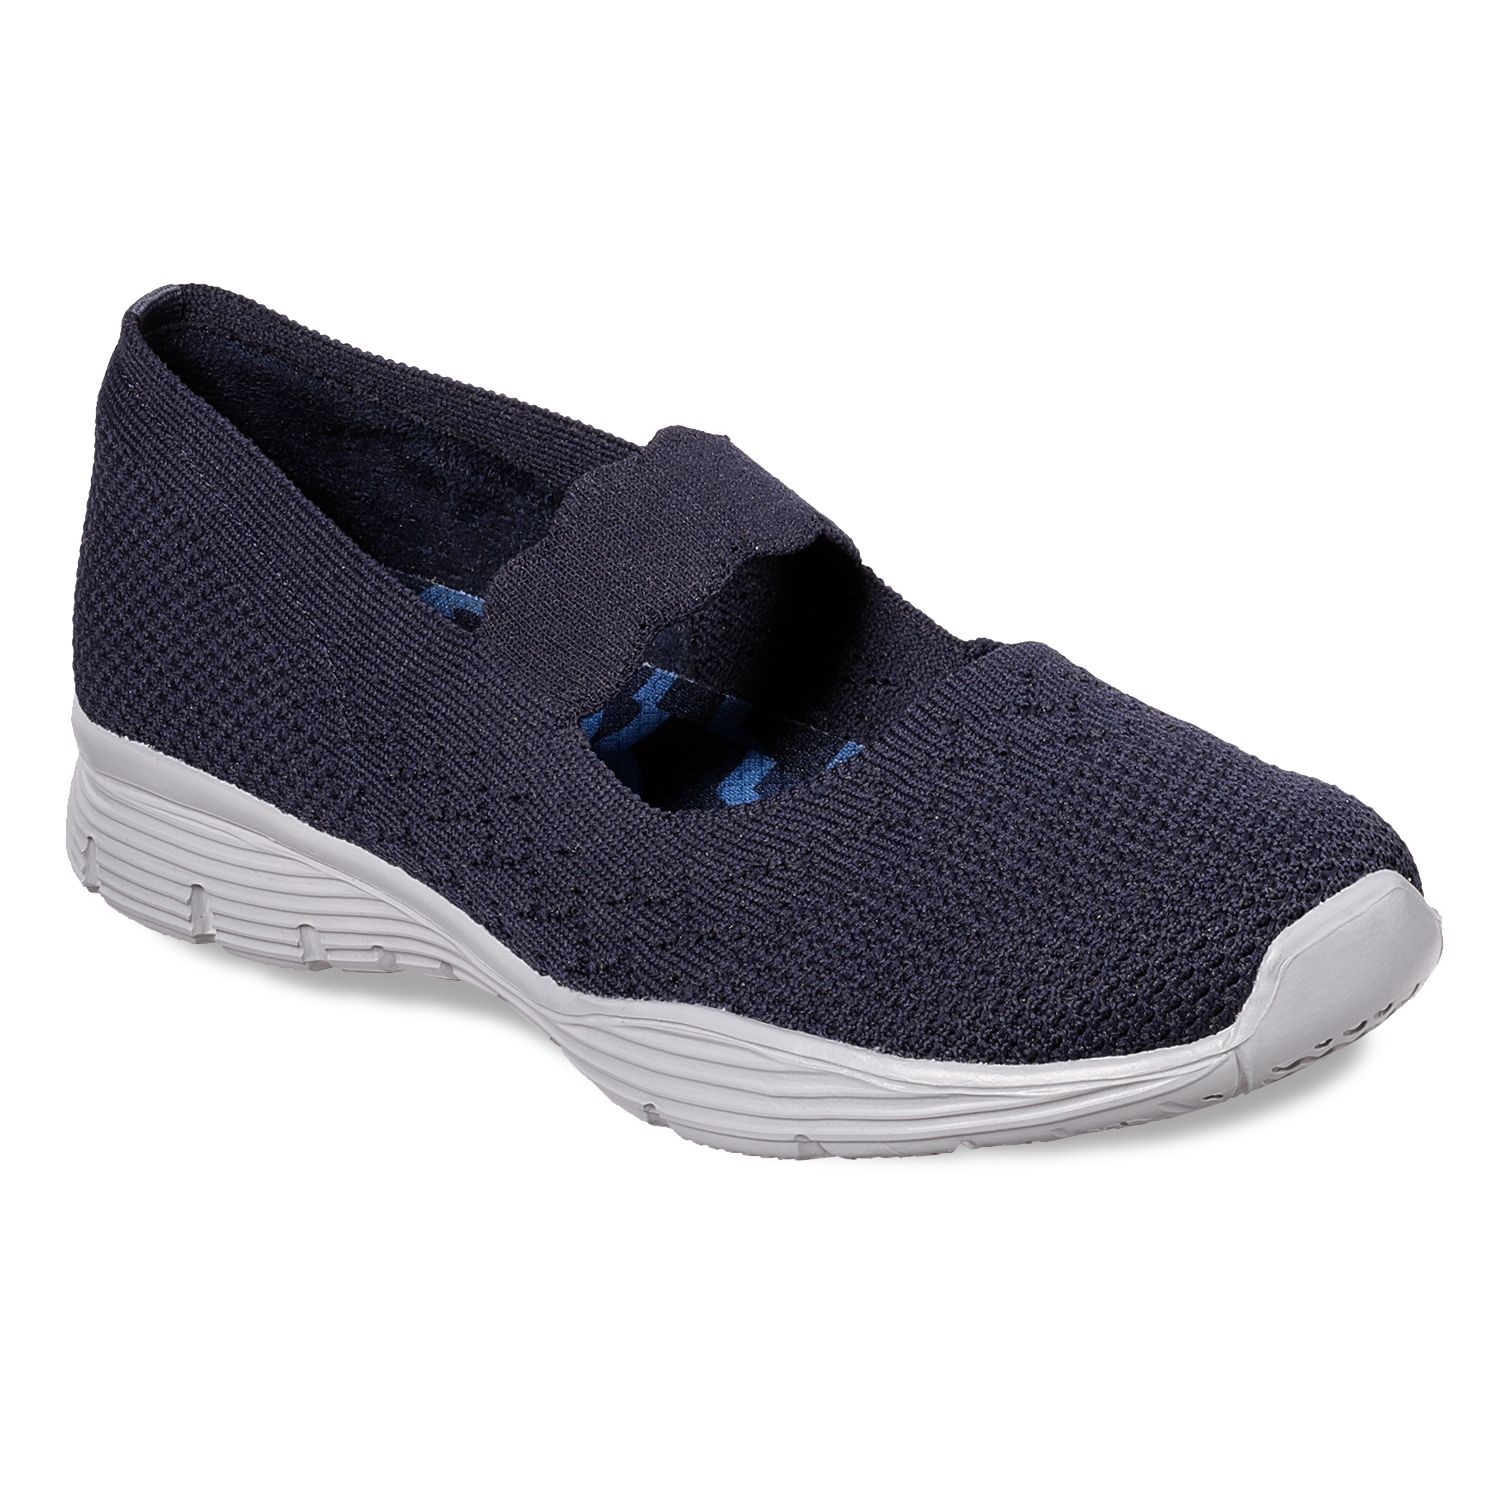 skechers shoes clearance